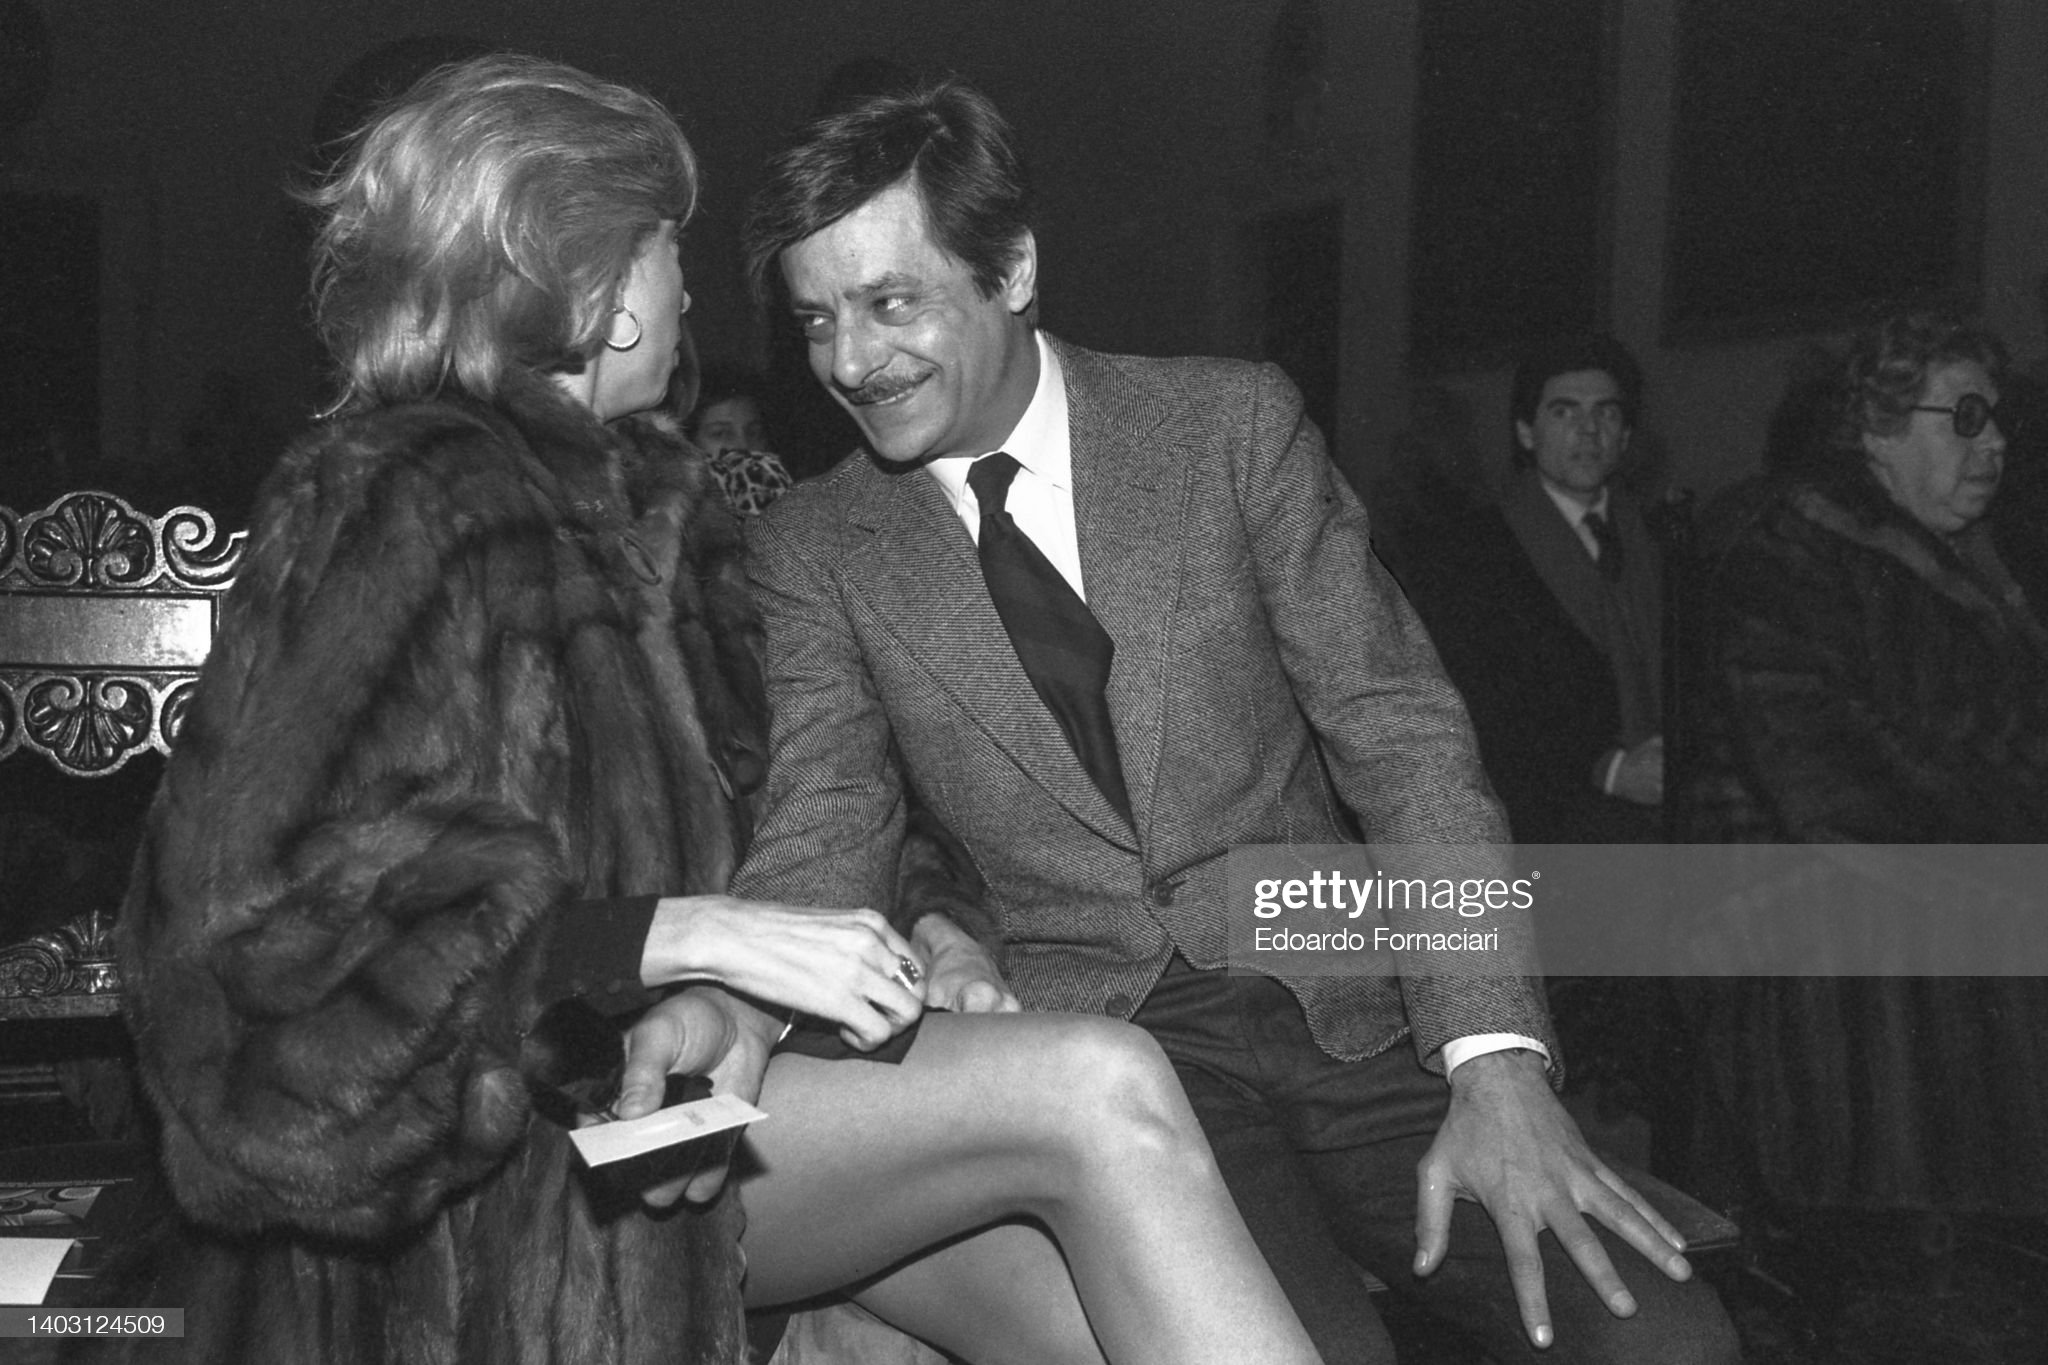 Giancarlo Giannini, Italian actor, with Mariangela Melato during a ceremony in Rome on 16 February 1984. 